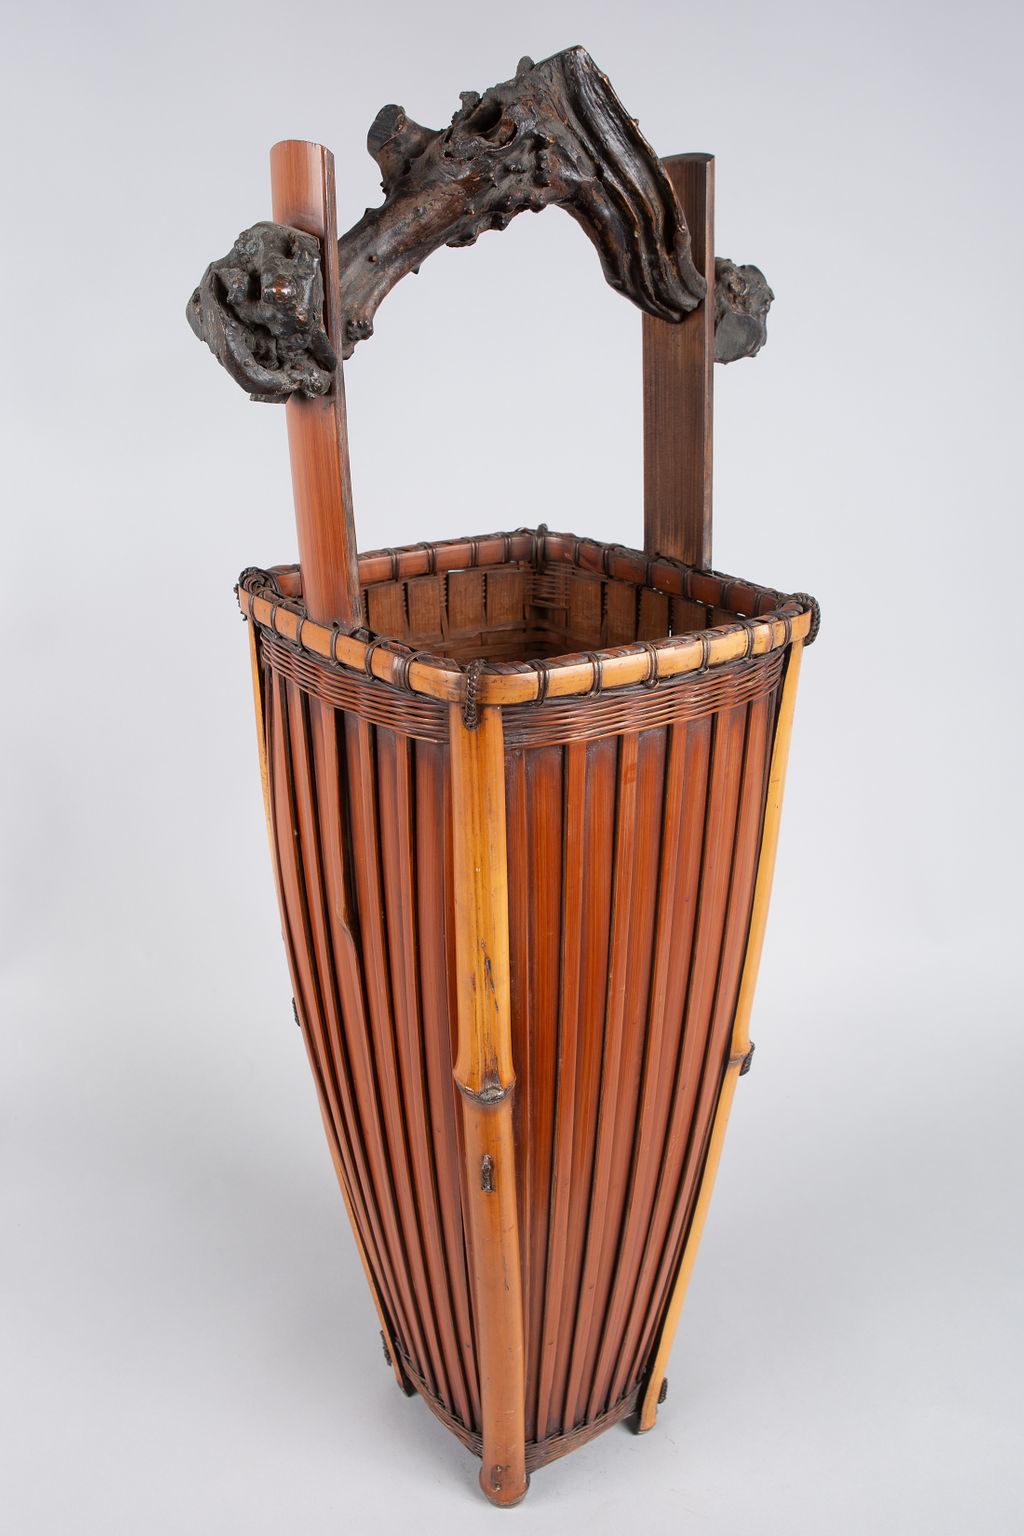 Tall Japanese Antique Ikebana (Flower Arranging Basket). Tall, stylish flower arranging basket with a great multi-toned design and very nice woven knot details. Meiji period (1868-1912), made of smoked and polished bamboo with a natural root handle.